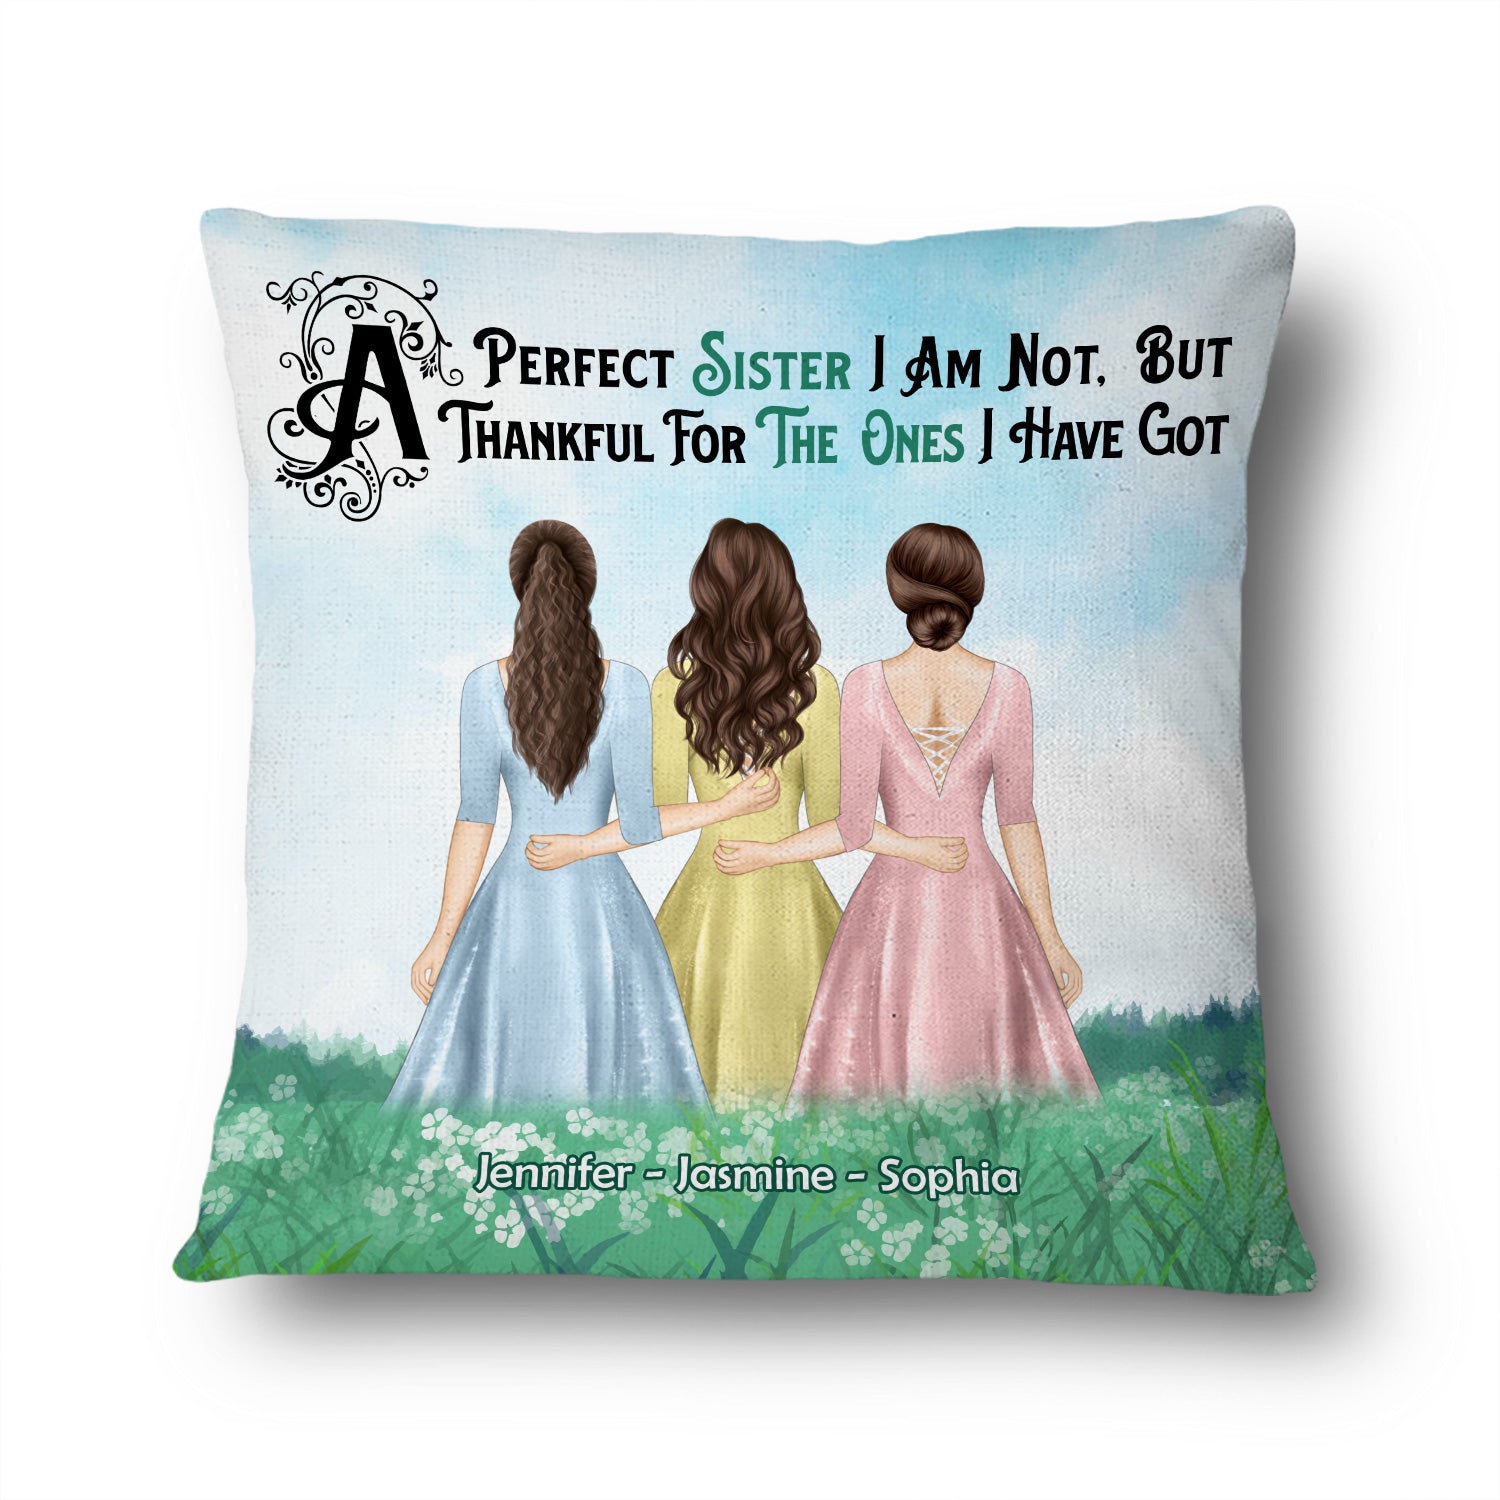 A Perfect Sister I Am Not - Gift For Sisters - Personalized Custom Pillow